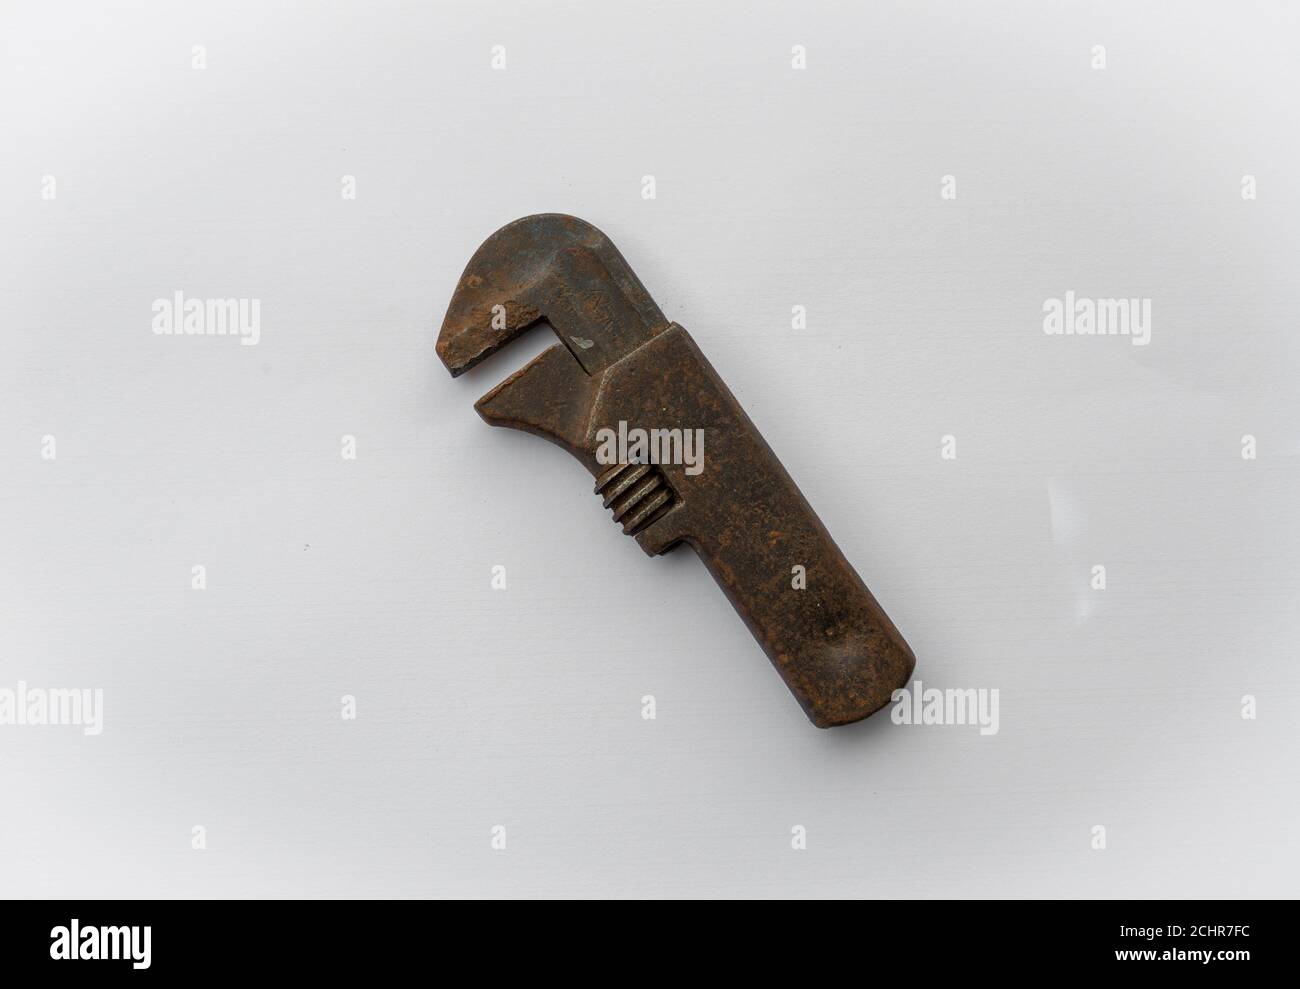 vintage adjustable spanner   isolated on white backgroud Stock Photo